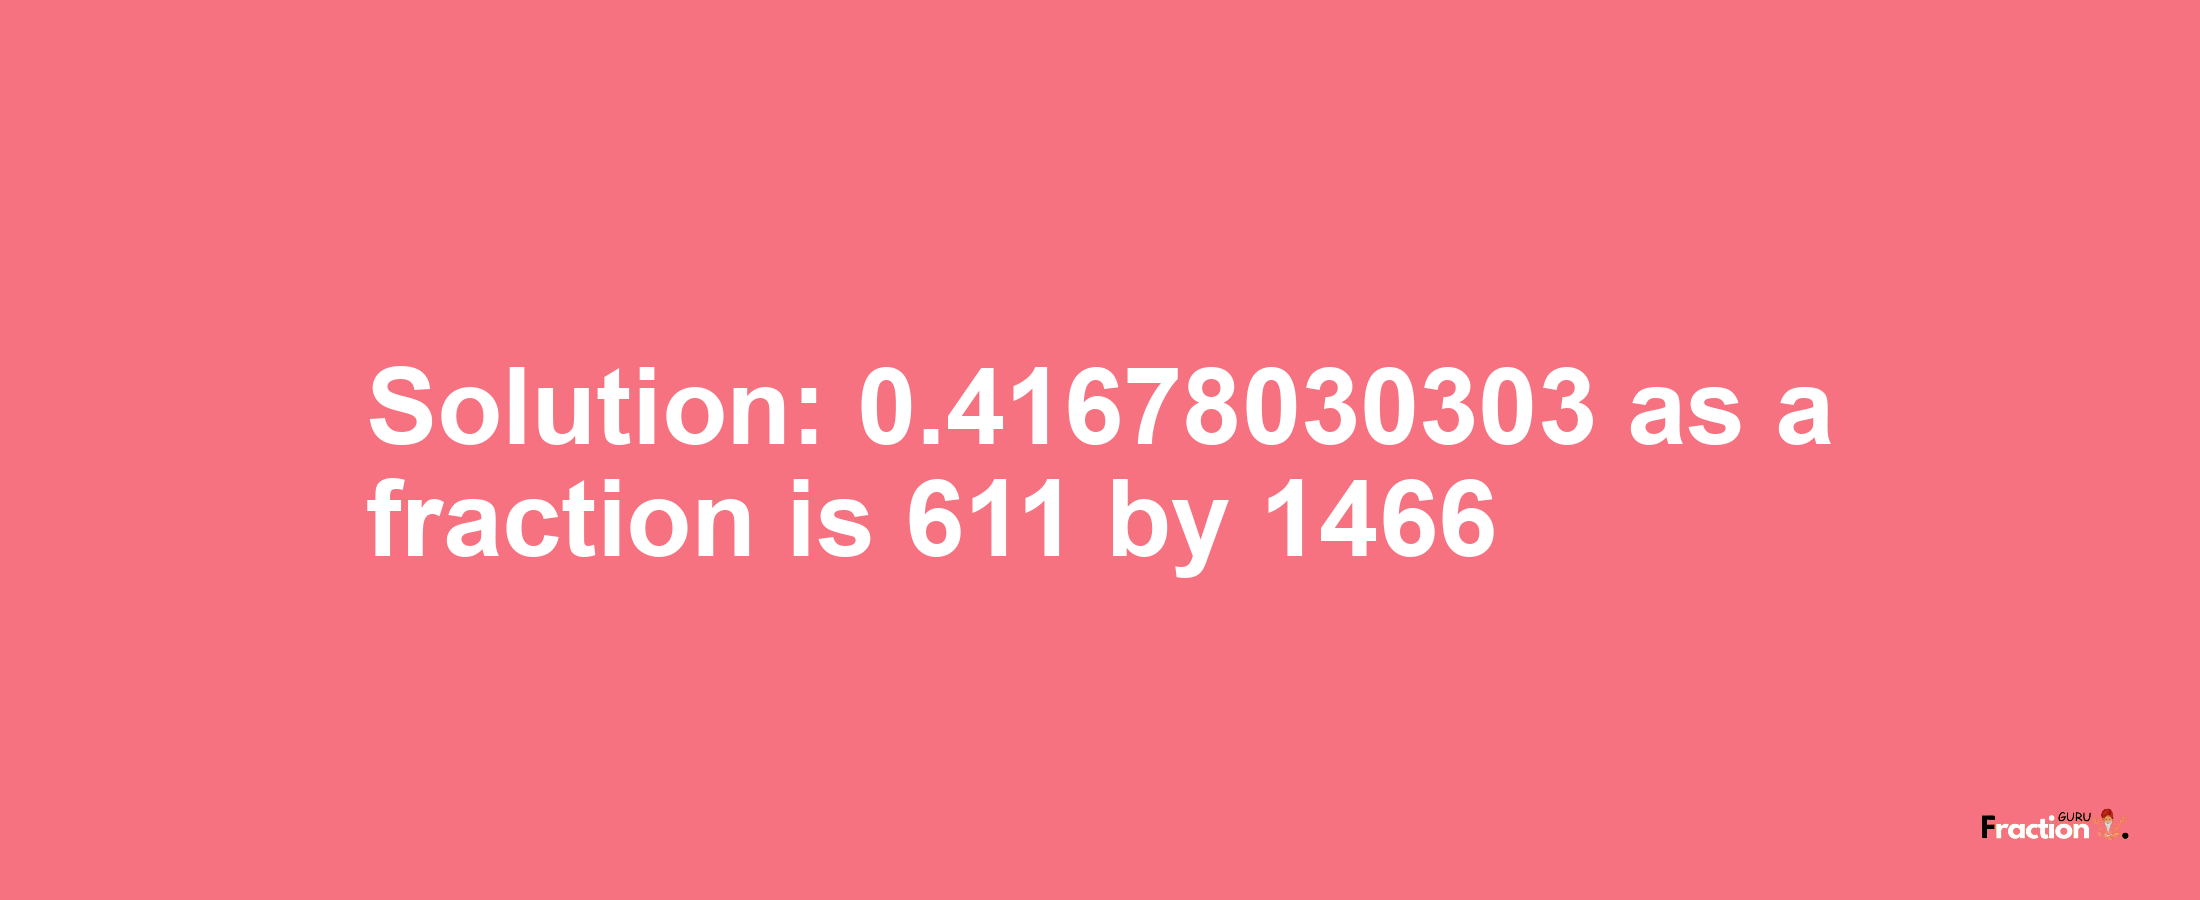 Solution:0.41678030303 as a fraction is 611/1466